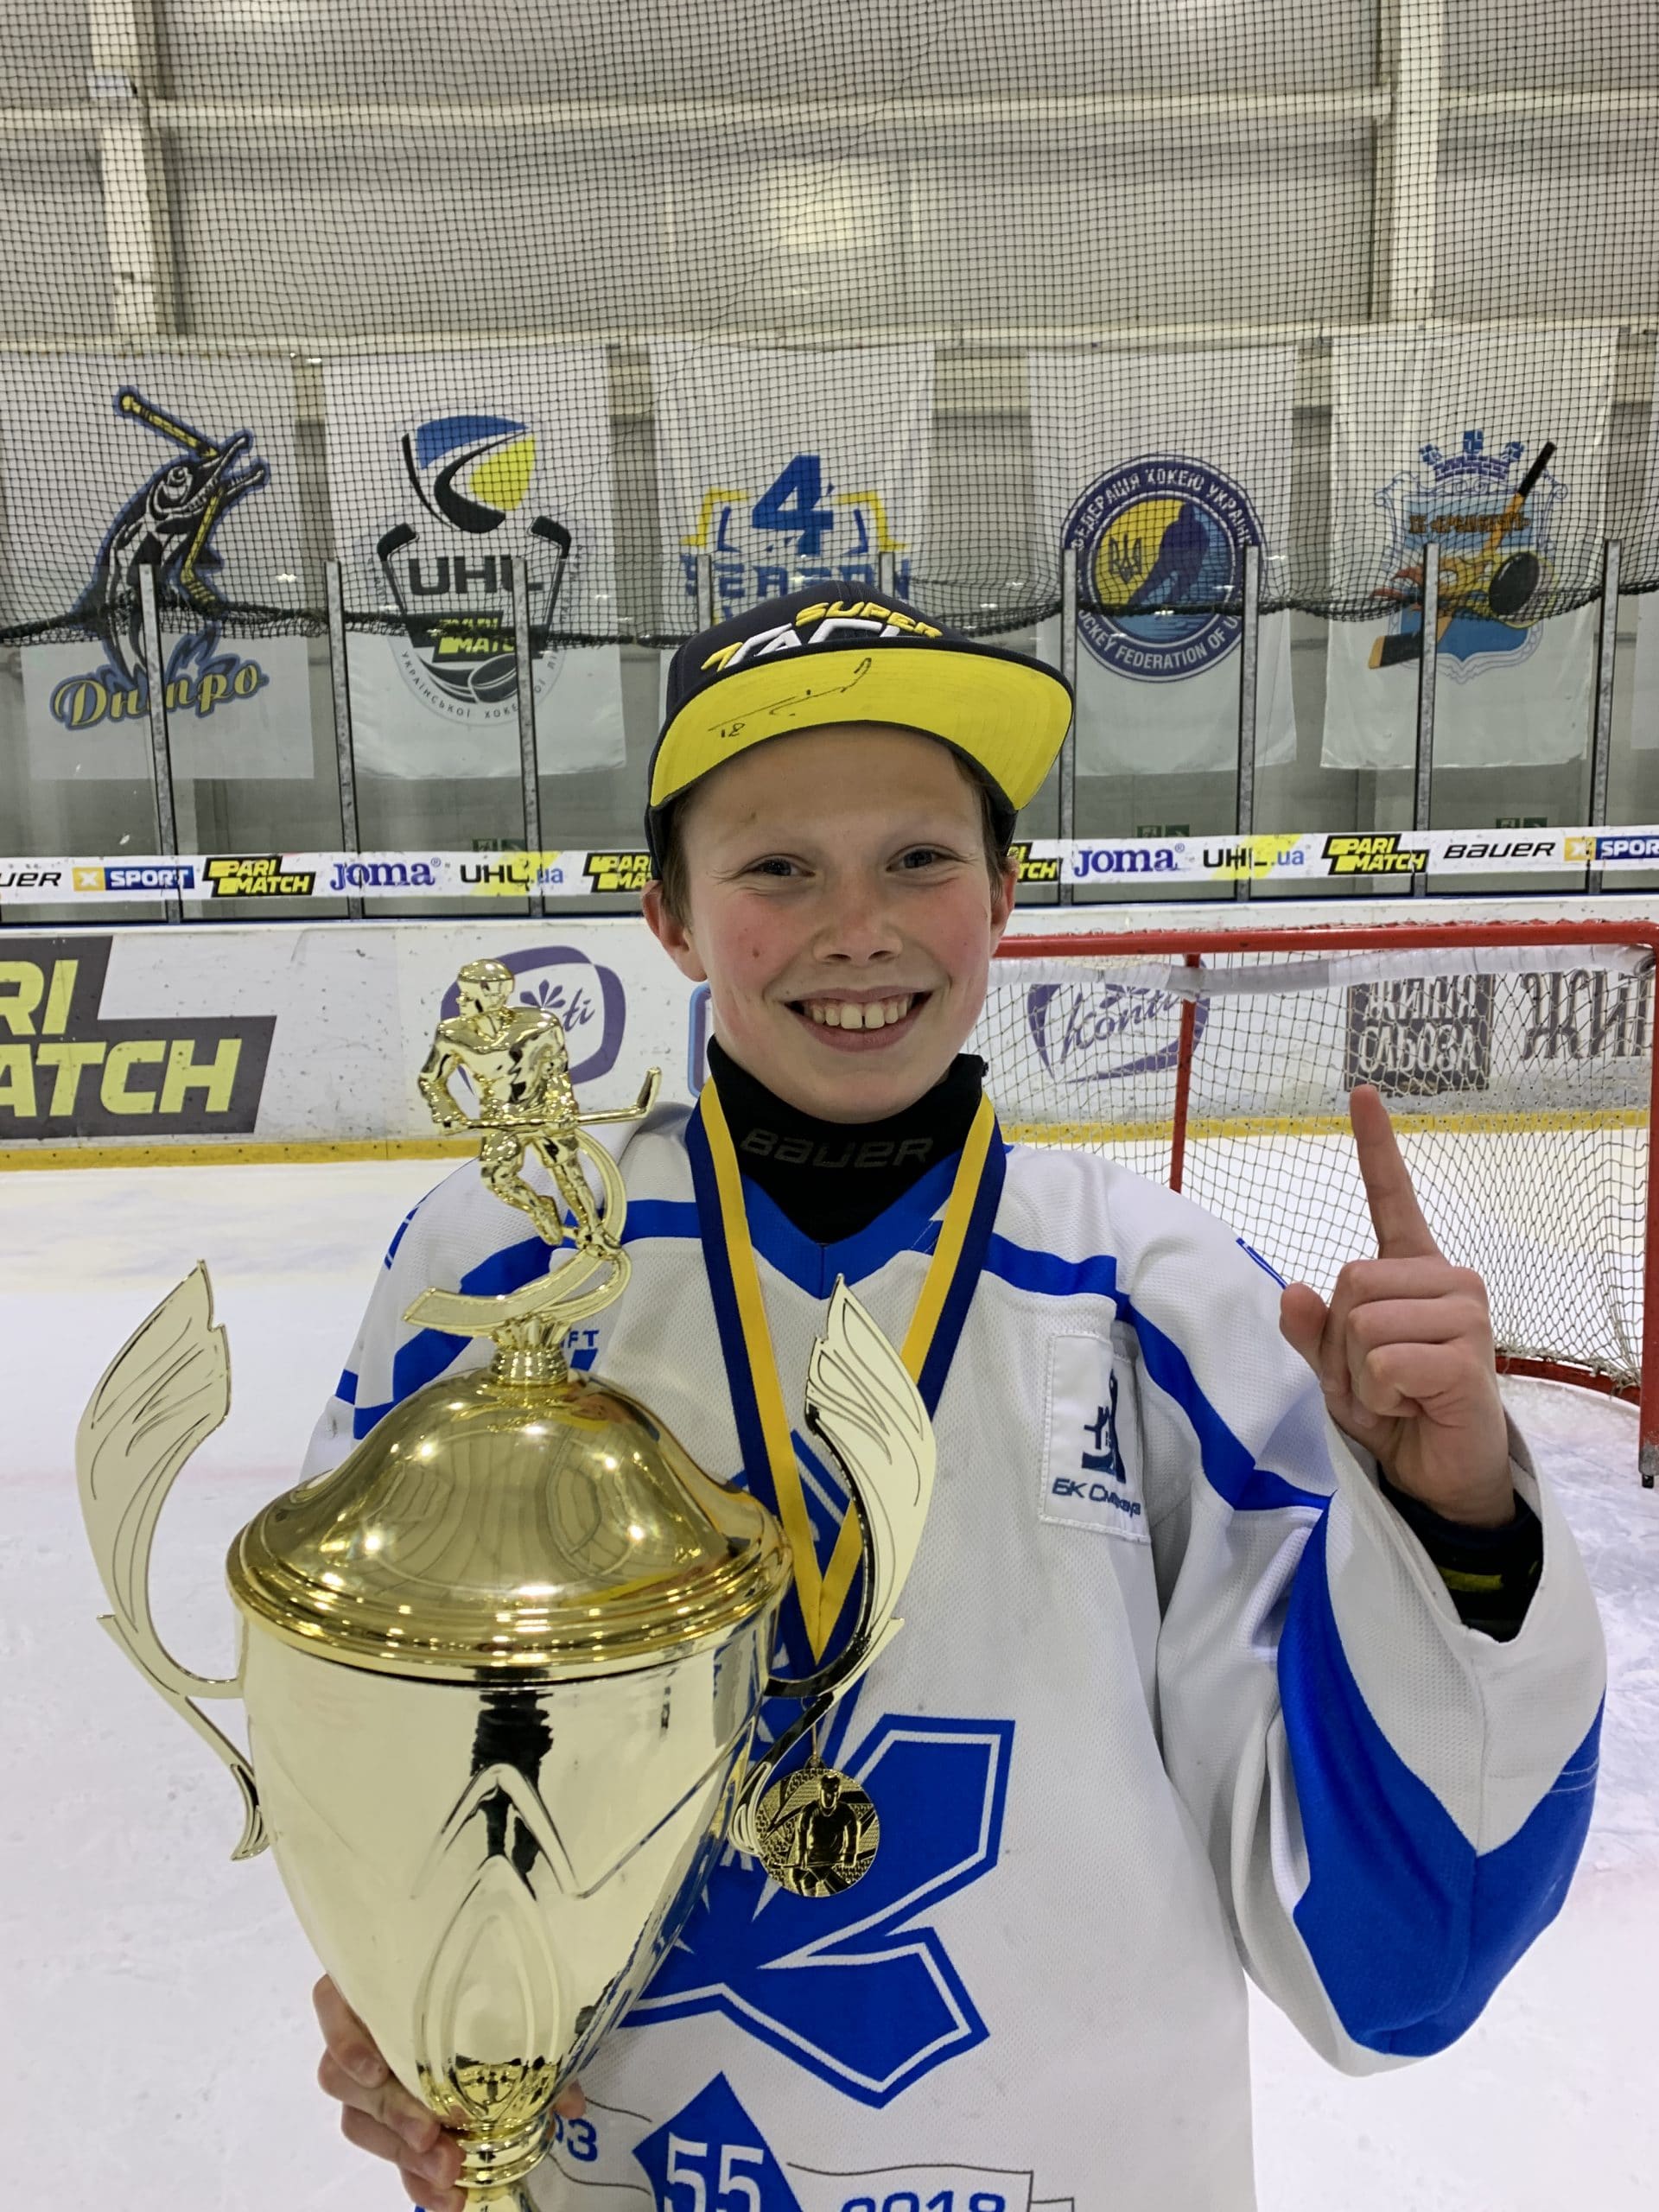 Ukrainian teen Dany Bereza with a hockey trophy holding up a hand gesturing number 1